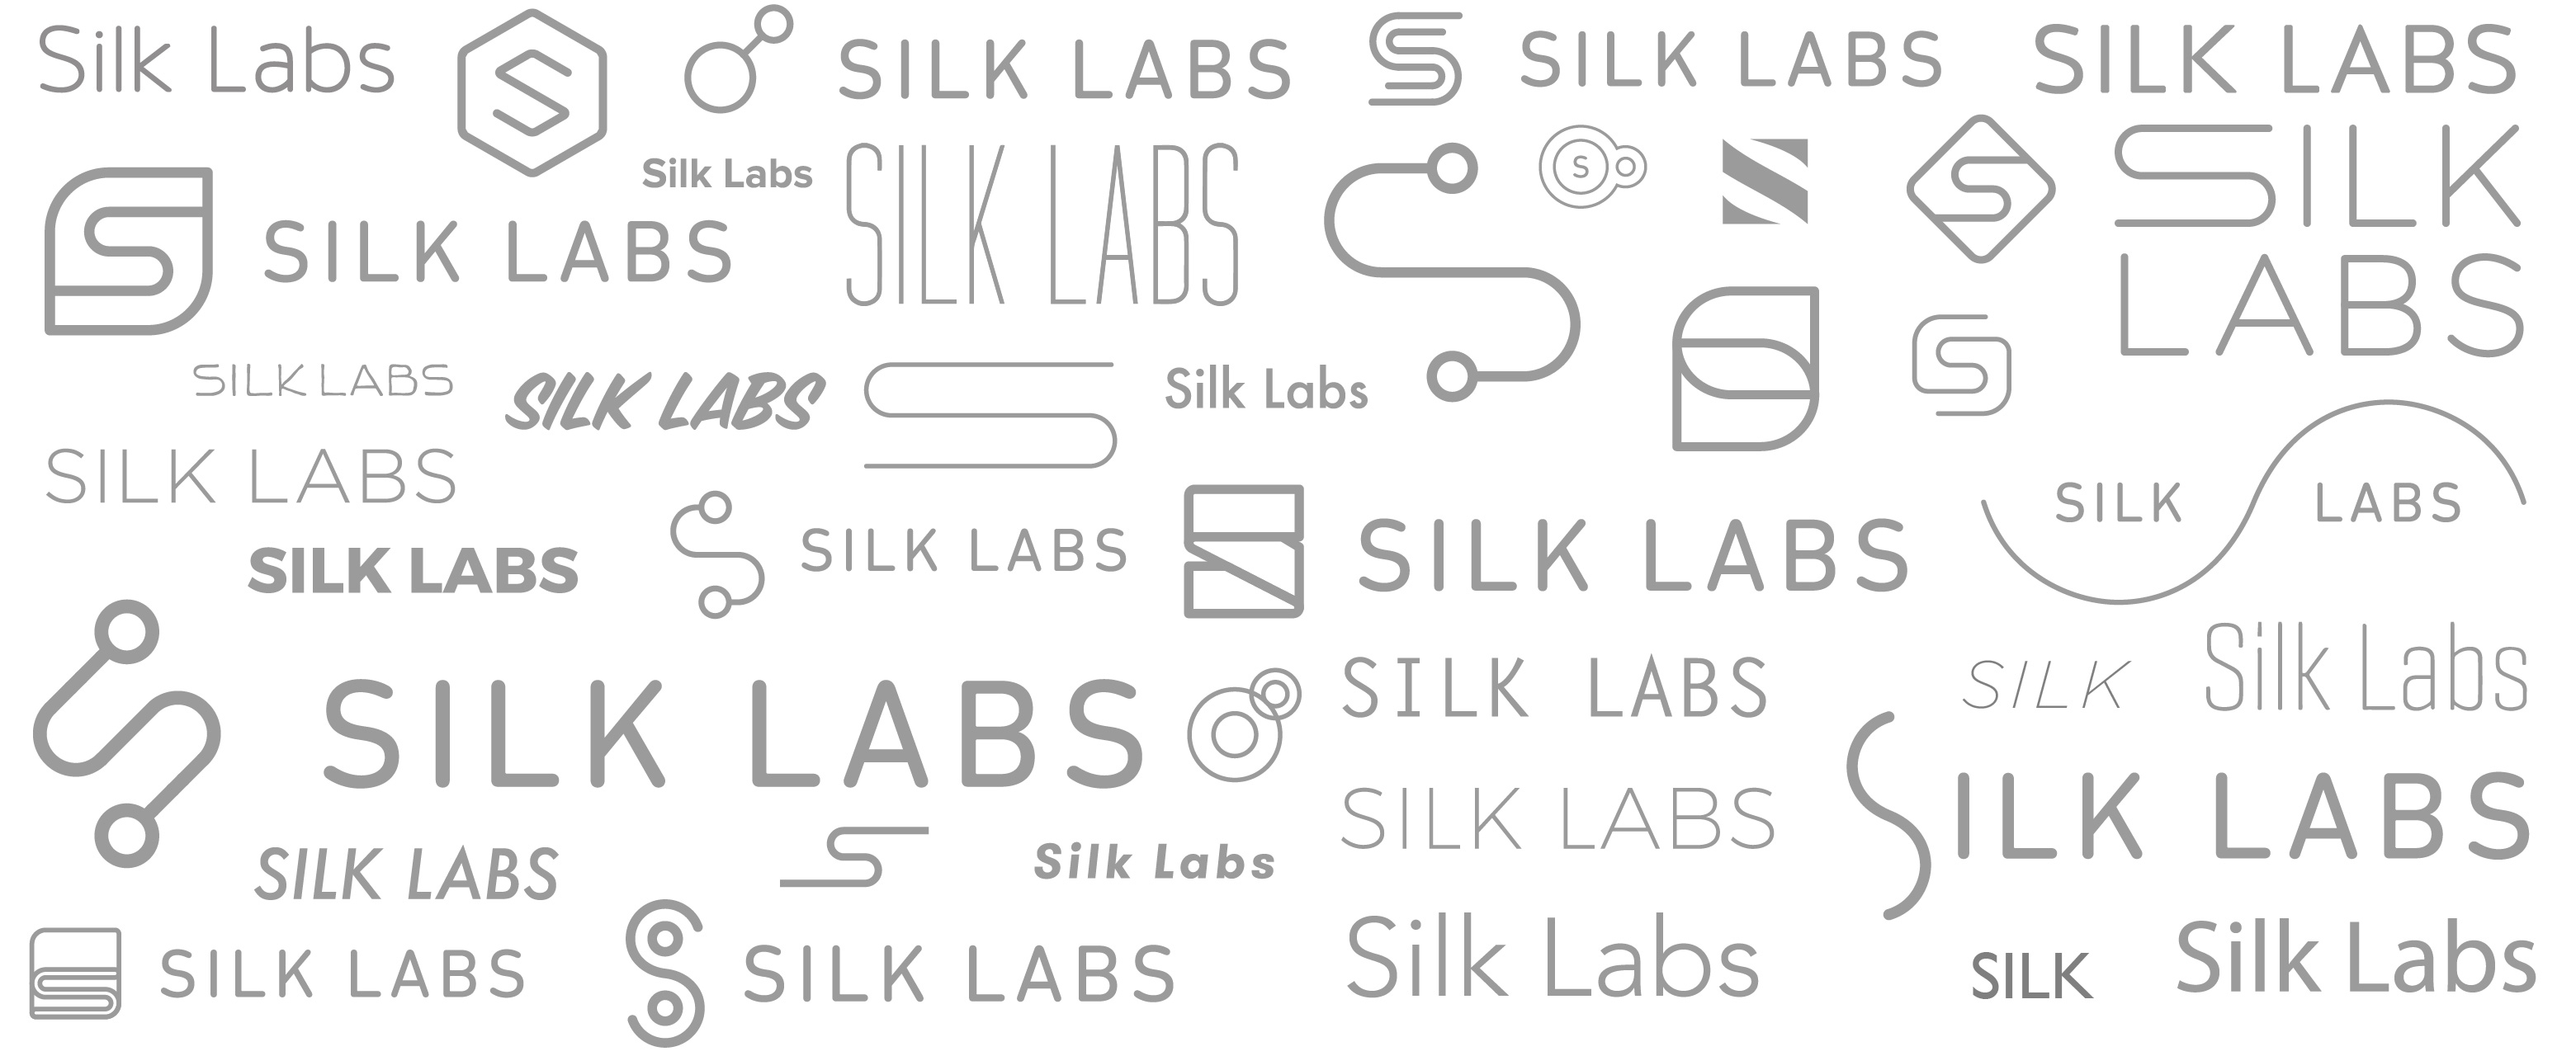 Apple Reportedly Acquires Privacy-focused Artificial Intelligence Startup ‘Silk Labs’